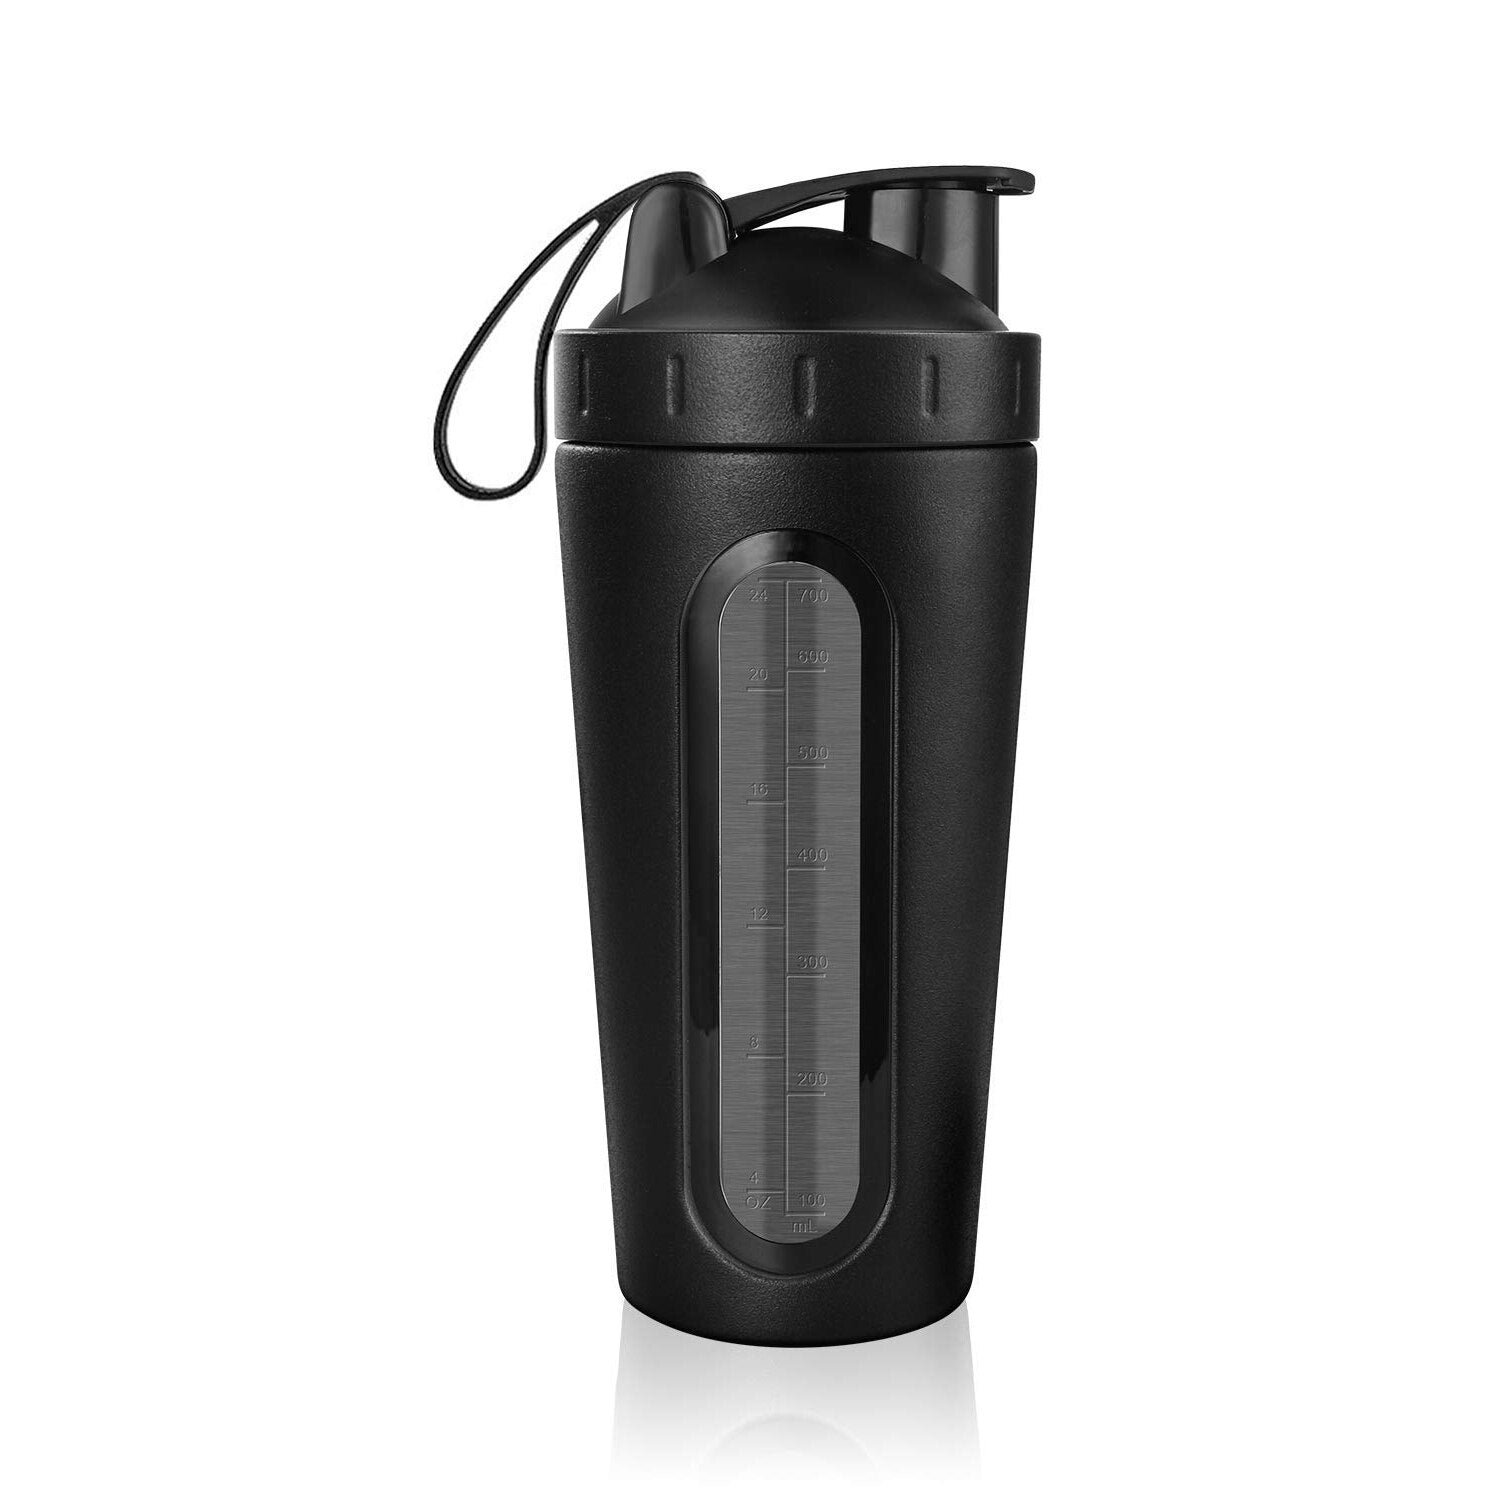 Leak Proof 700ml/28OZ Stainless Steel Protein Shaker and water Bottle with mixer